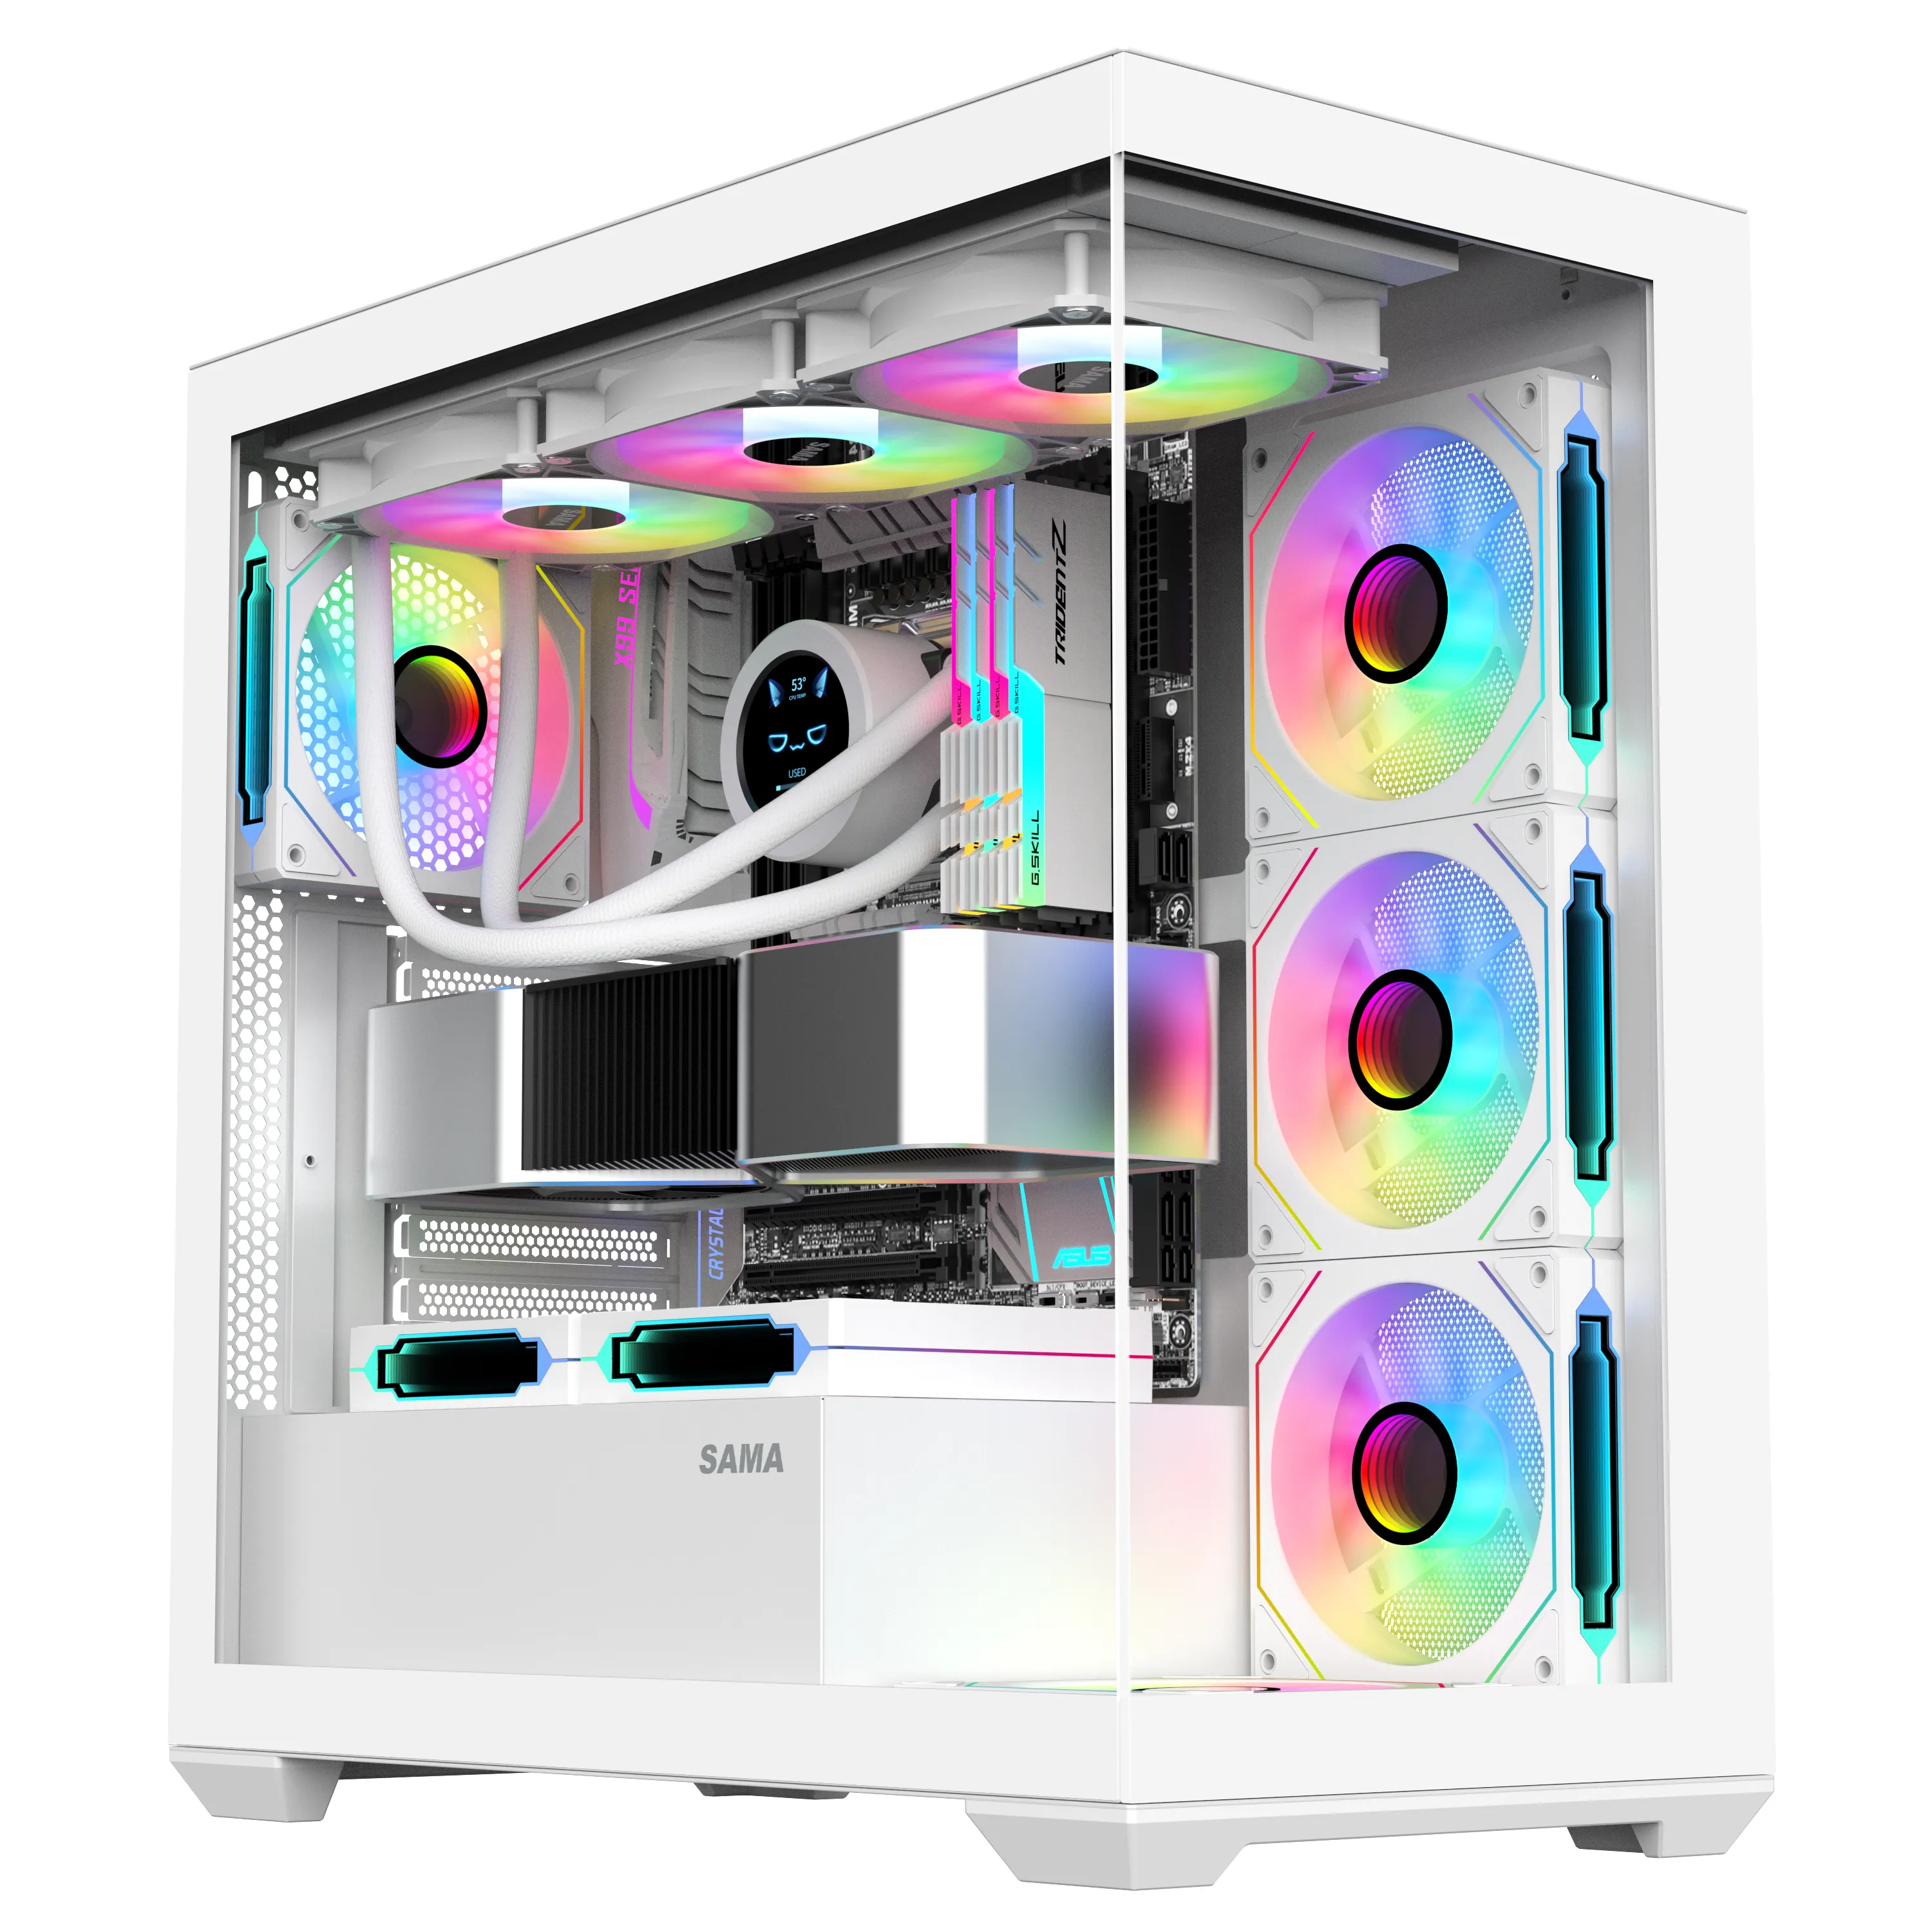 SAMA New design atx gaming case Tempered Glass computer case ODM/OEM Full Tower PC Case Reliable Quality gabinete pc pc cabinet